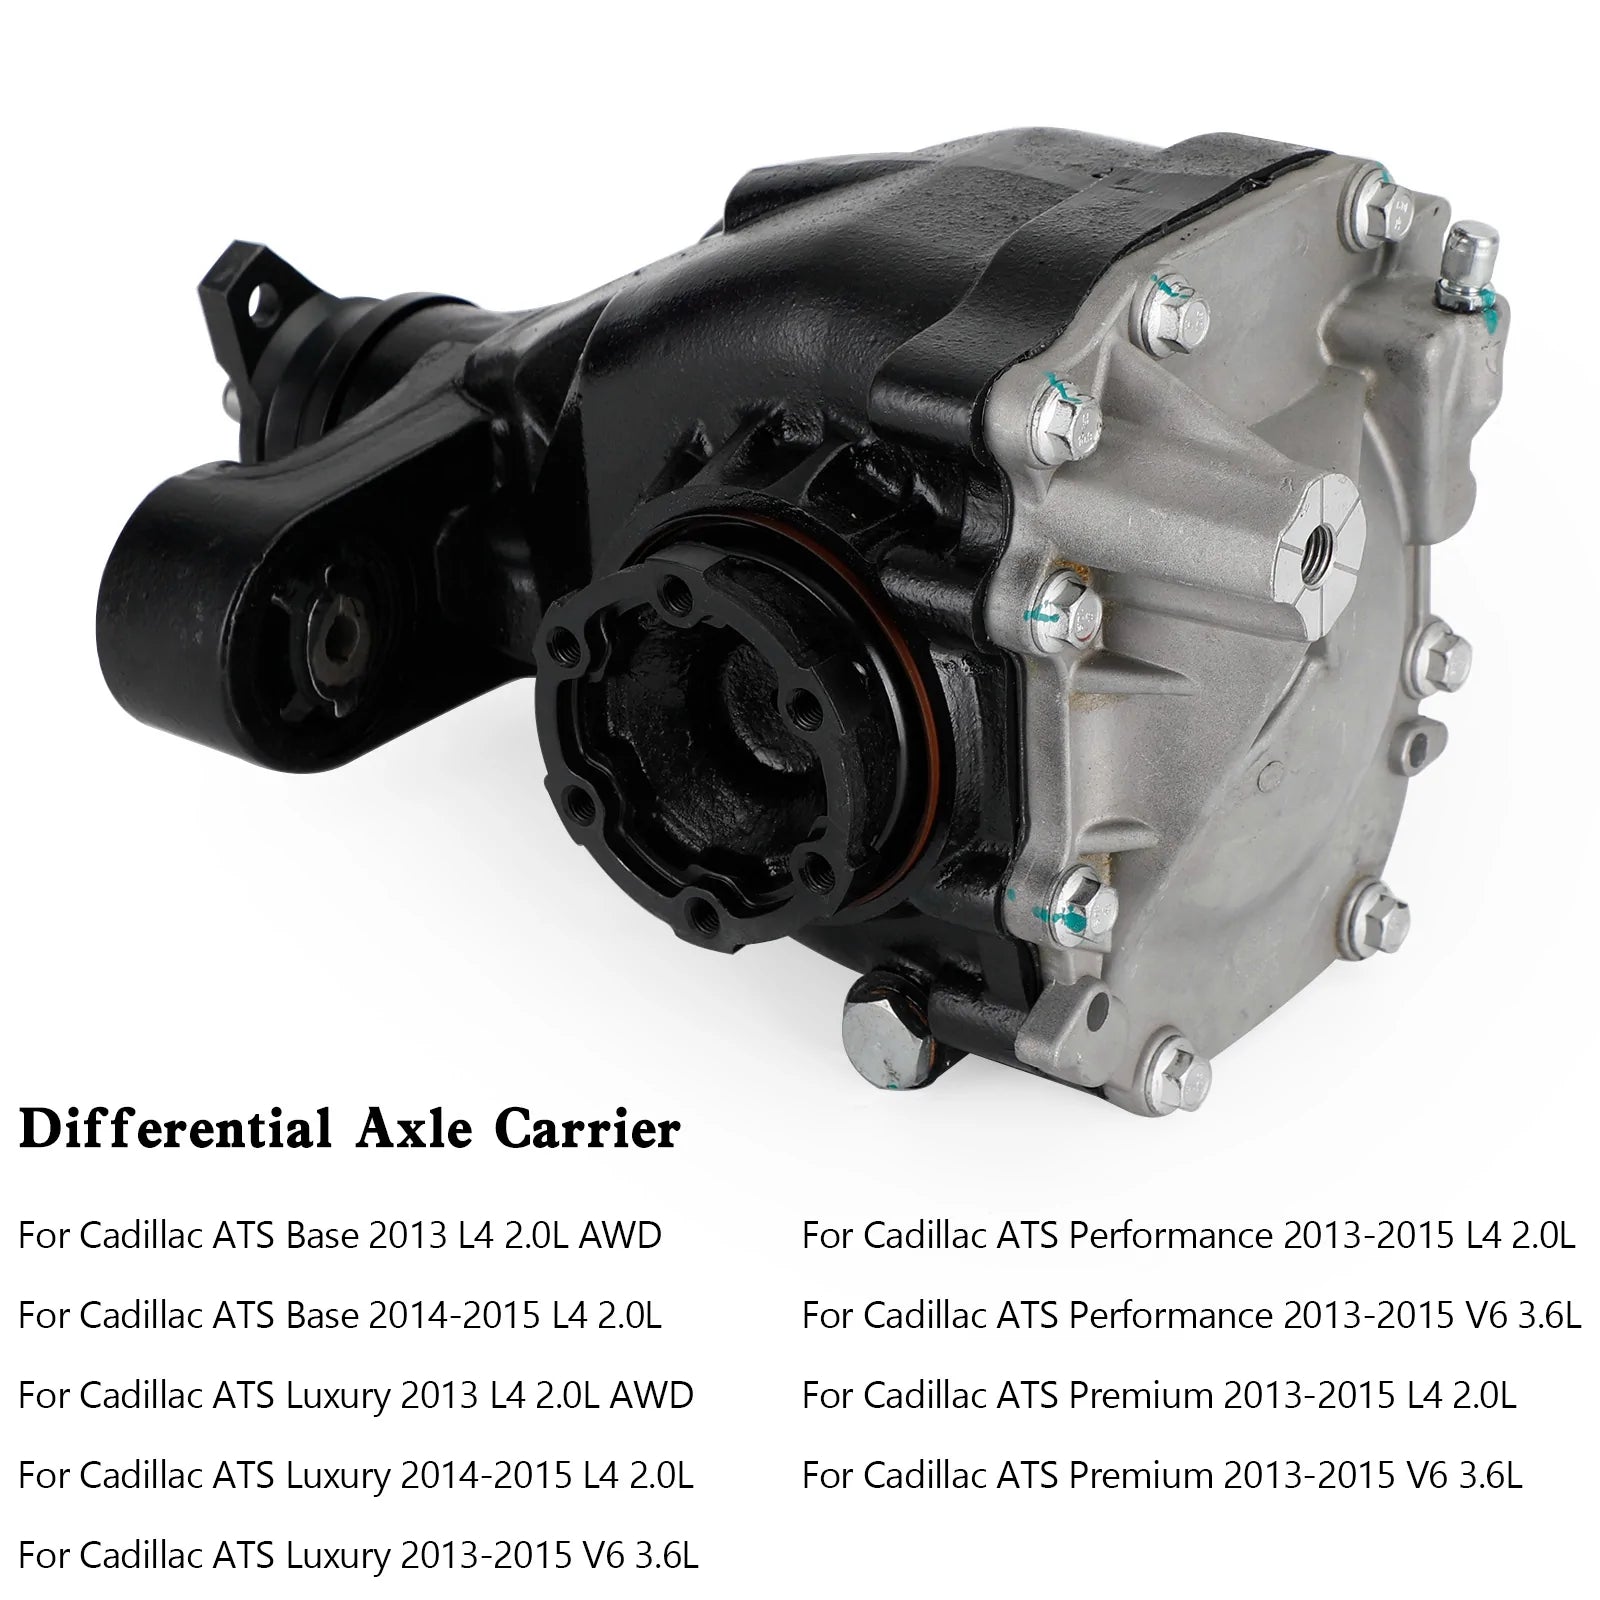 2013-2019 Cadillac Differenziale Asse Carrier 23156305 2993015 22927263 84110753 Generico